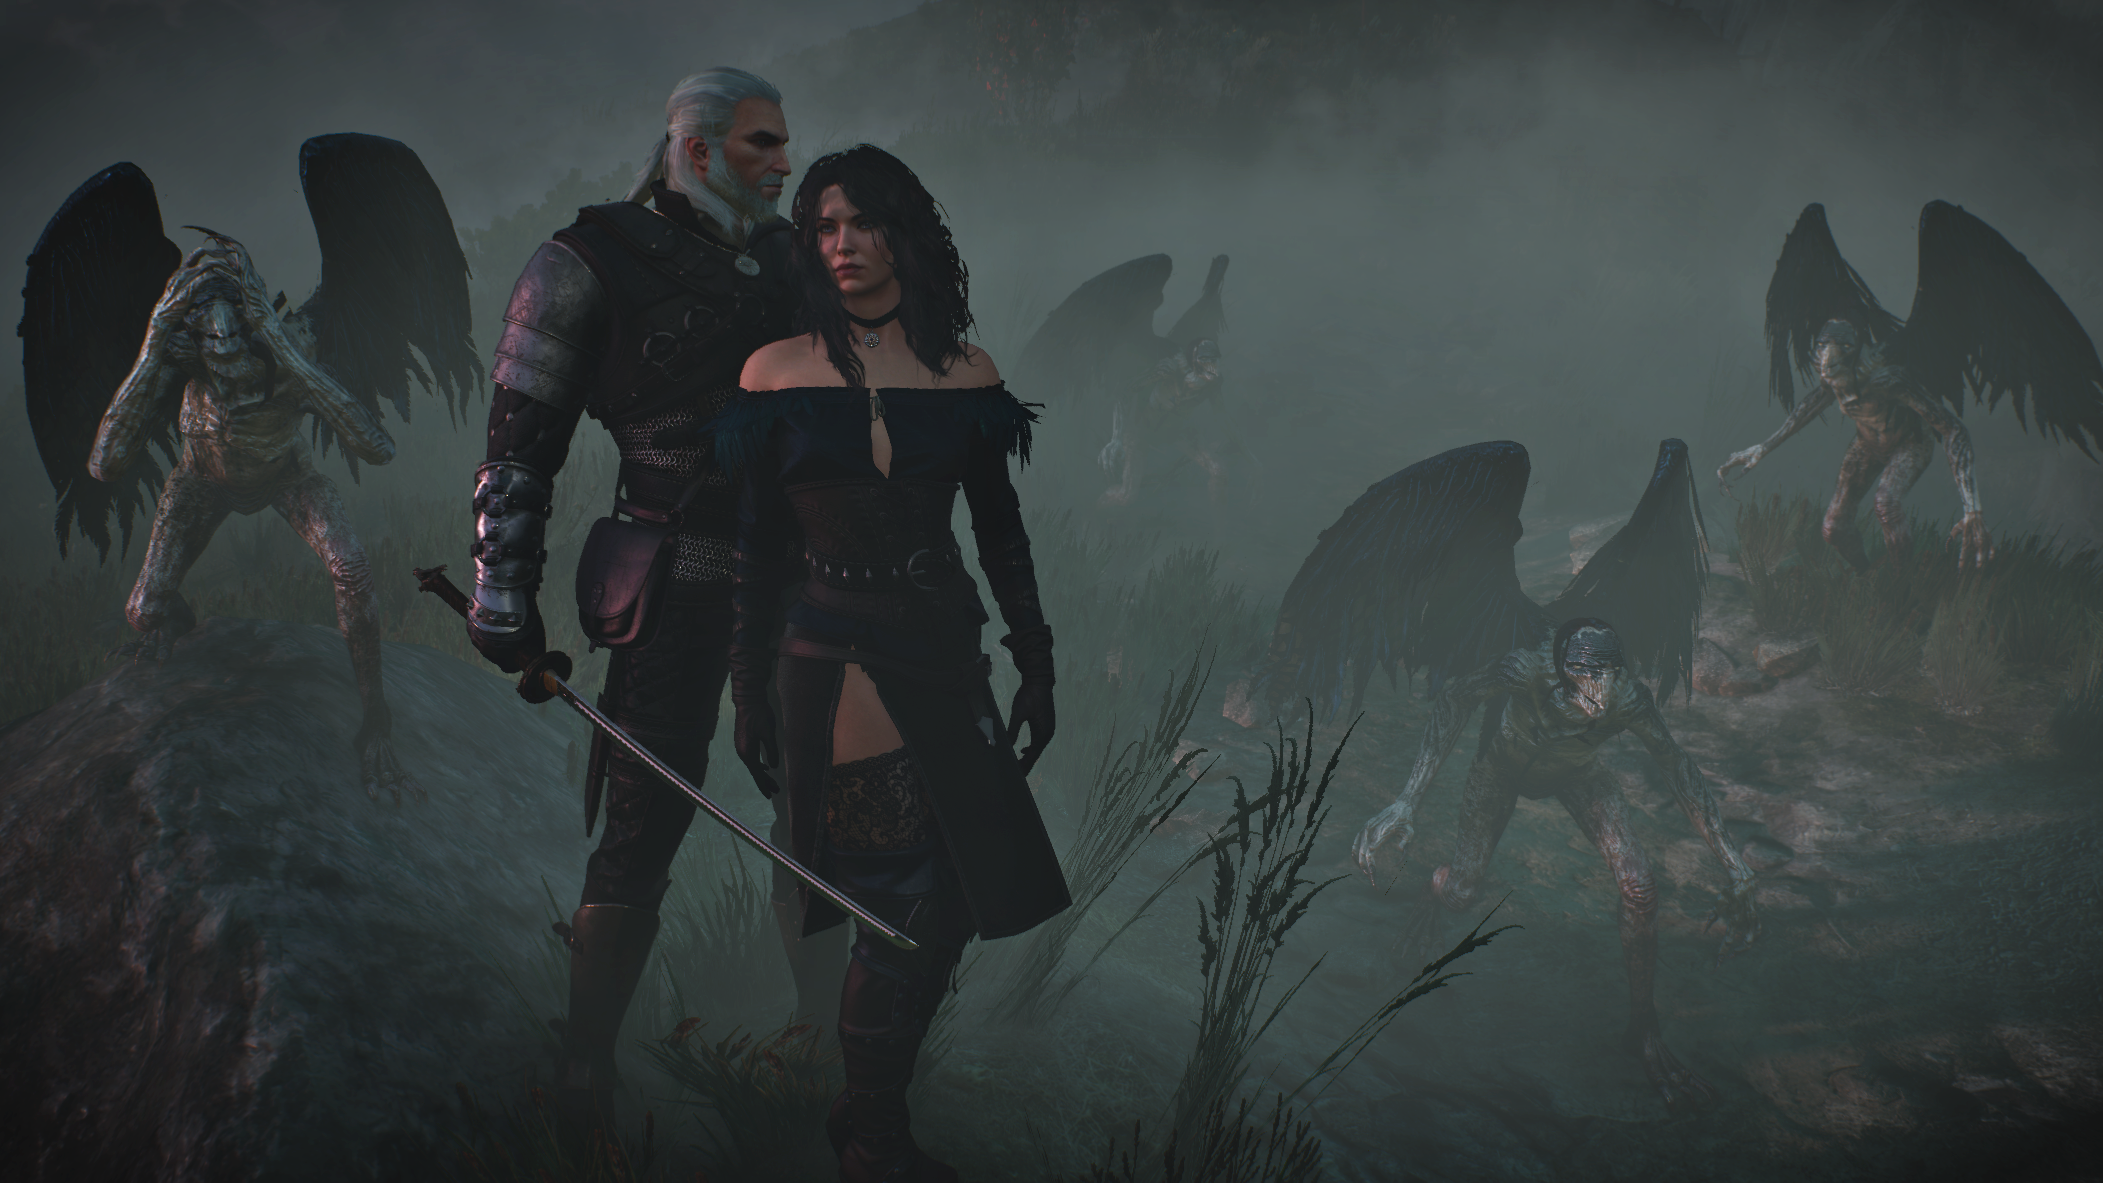 General 2103x1183 The Witcher The Witcher 3: Wild Hunt video games Geralt of Rivia couple CD Projekt RED book characters standing video game characters CGI Yennefer of Vengerberg wings bare shoulders video game men long hair video game girls sword video game art screen shot